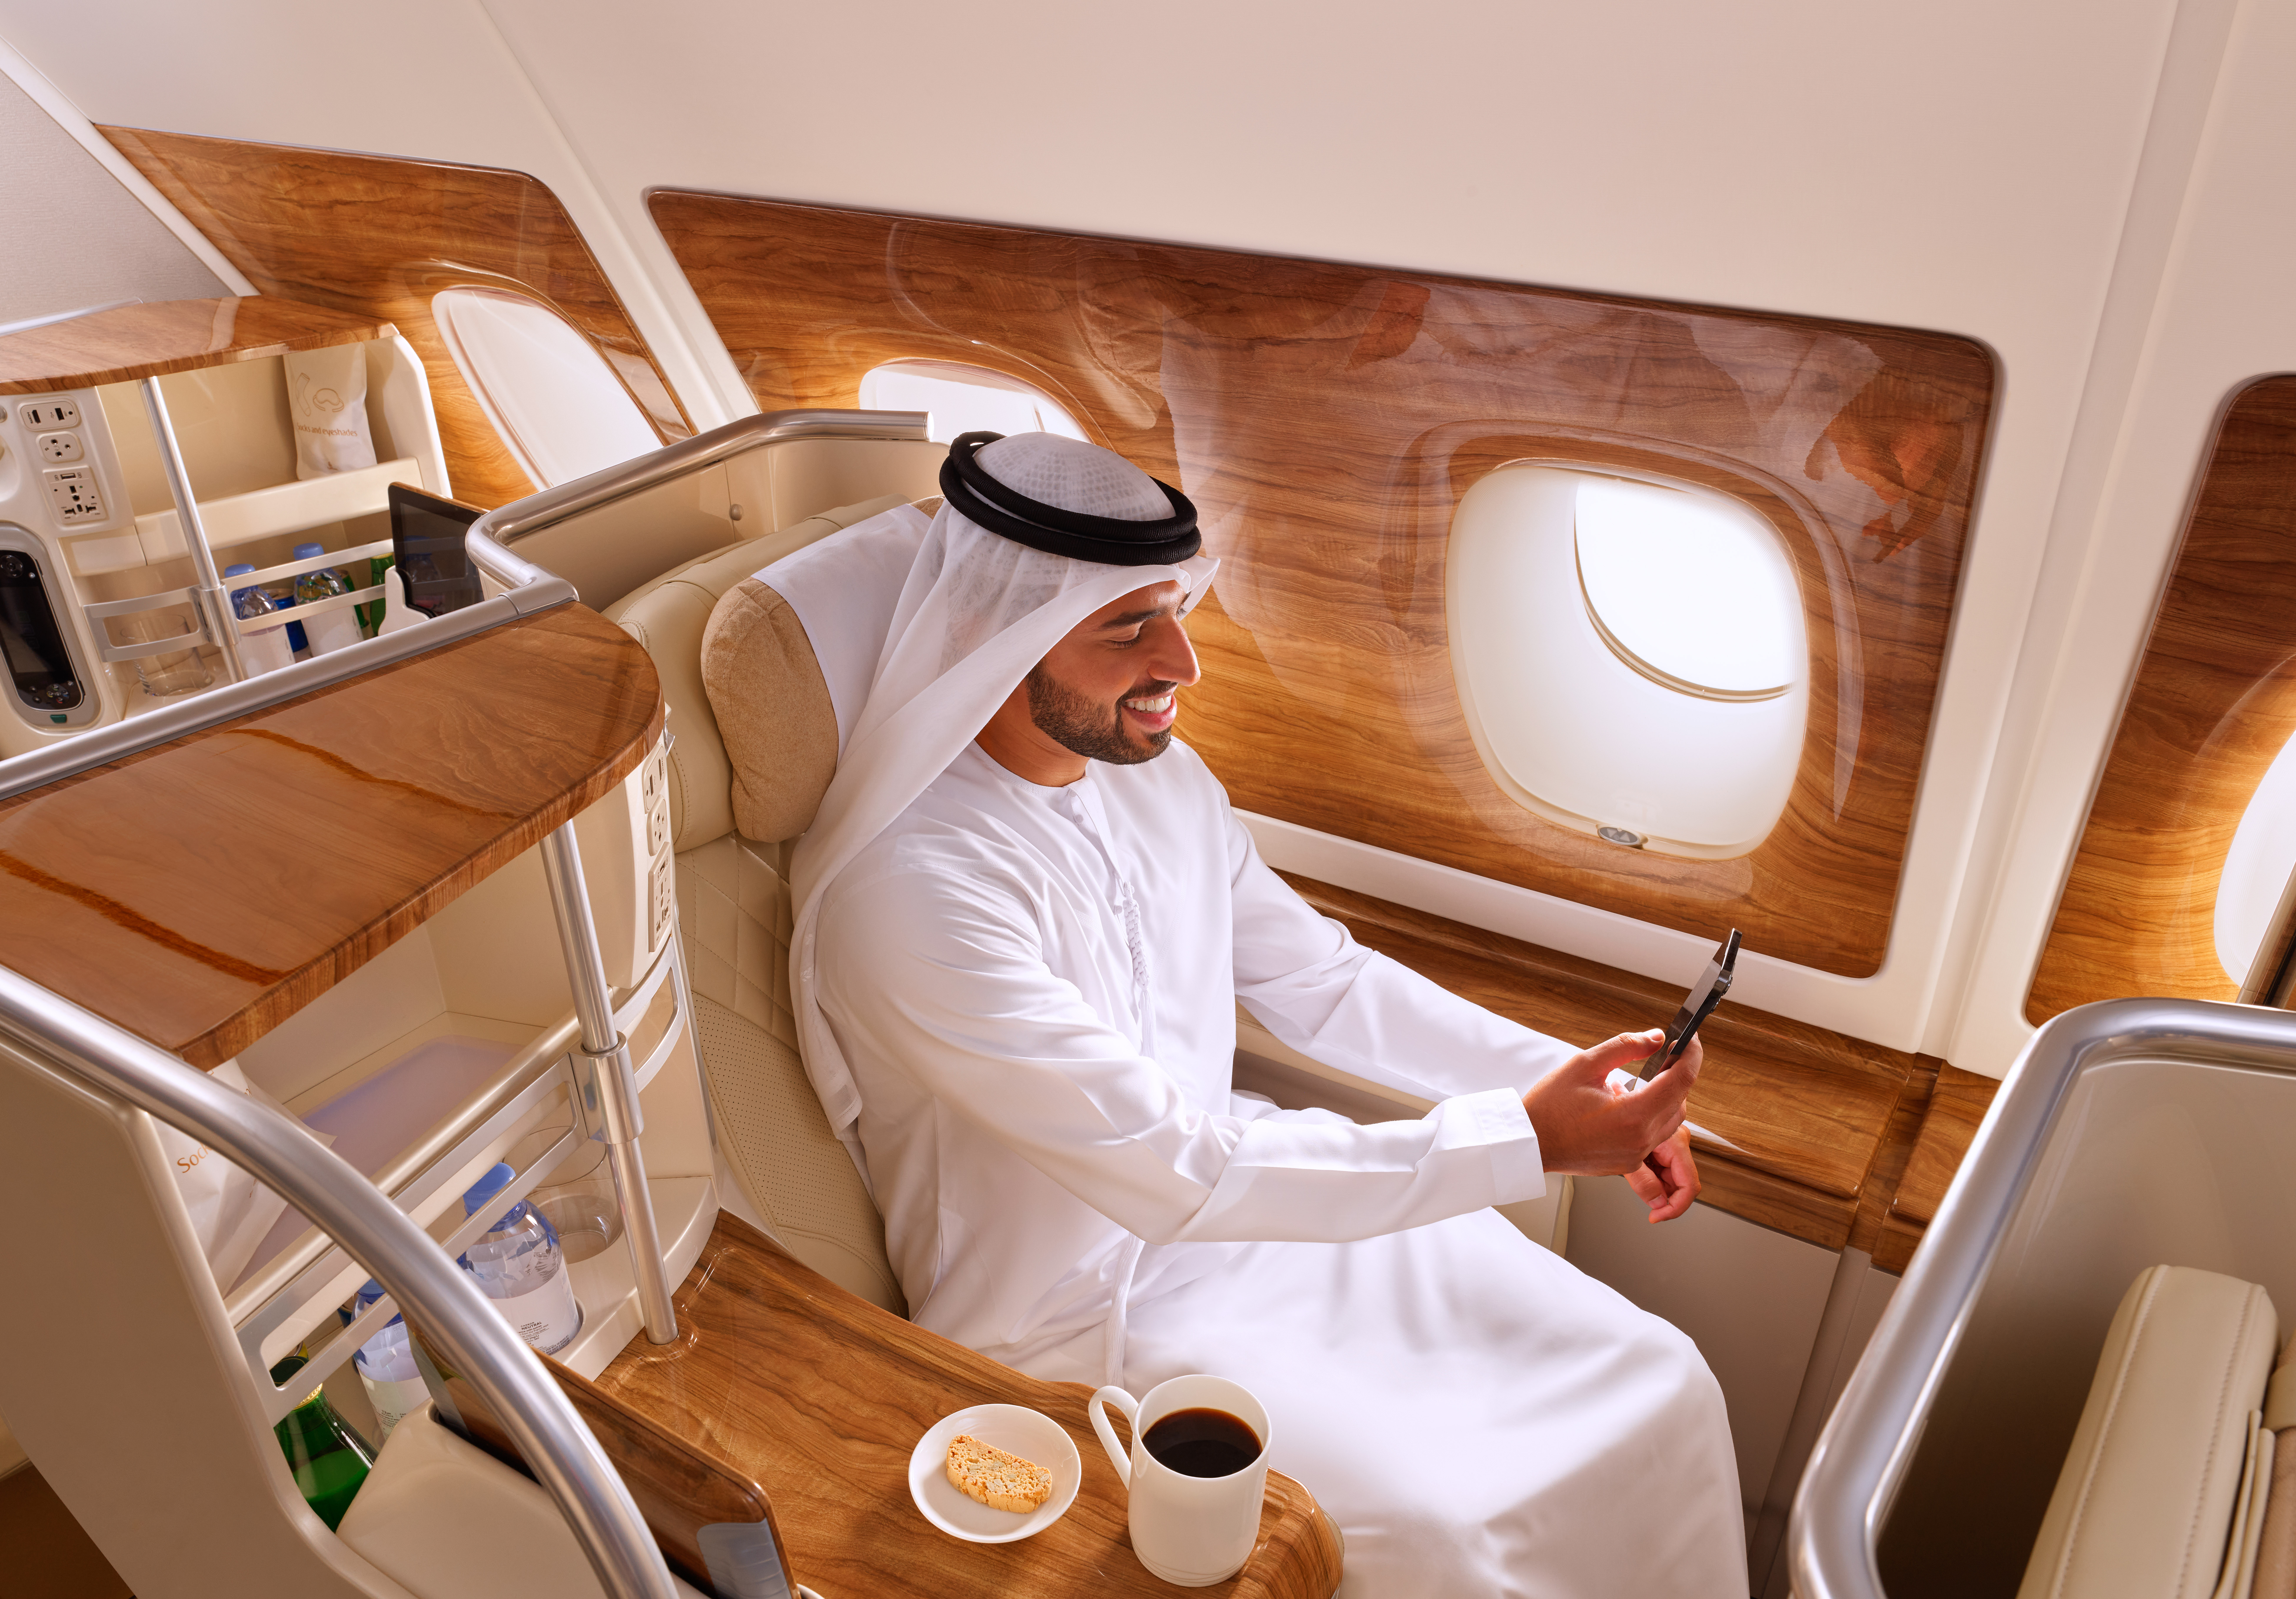 Emirates Introduces Free WiFi For Skywards Members